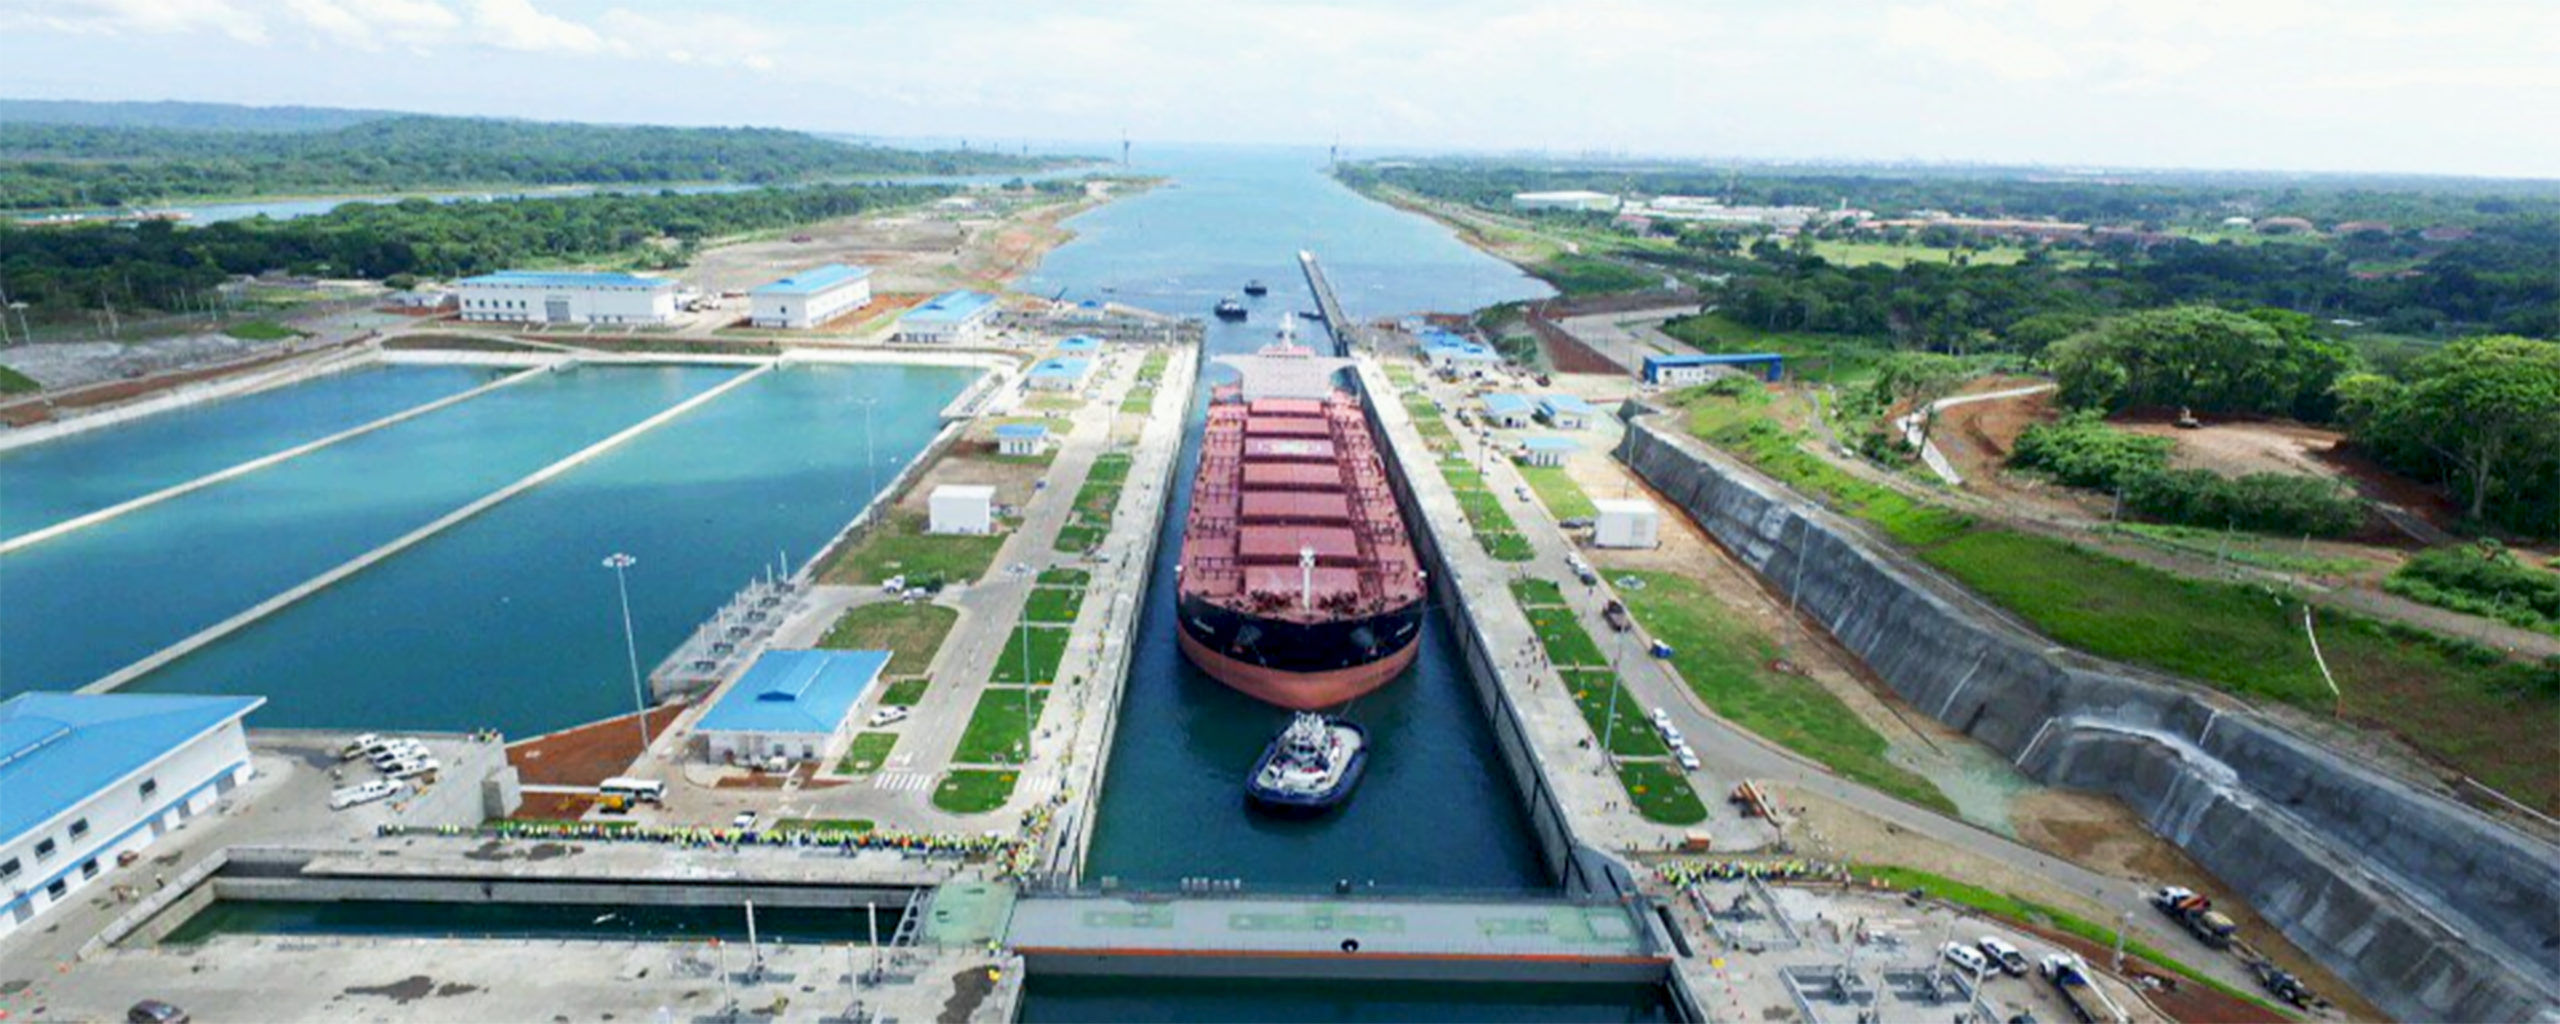  Panama canal faces challenging situation due to water shortage. (Photo Internet reproduction)